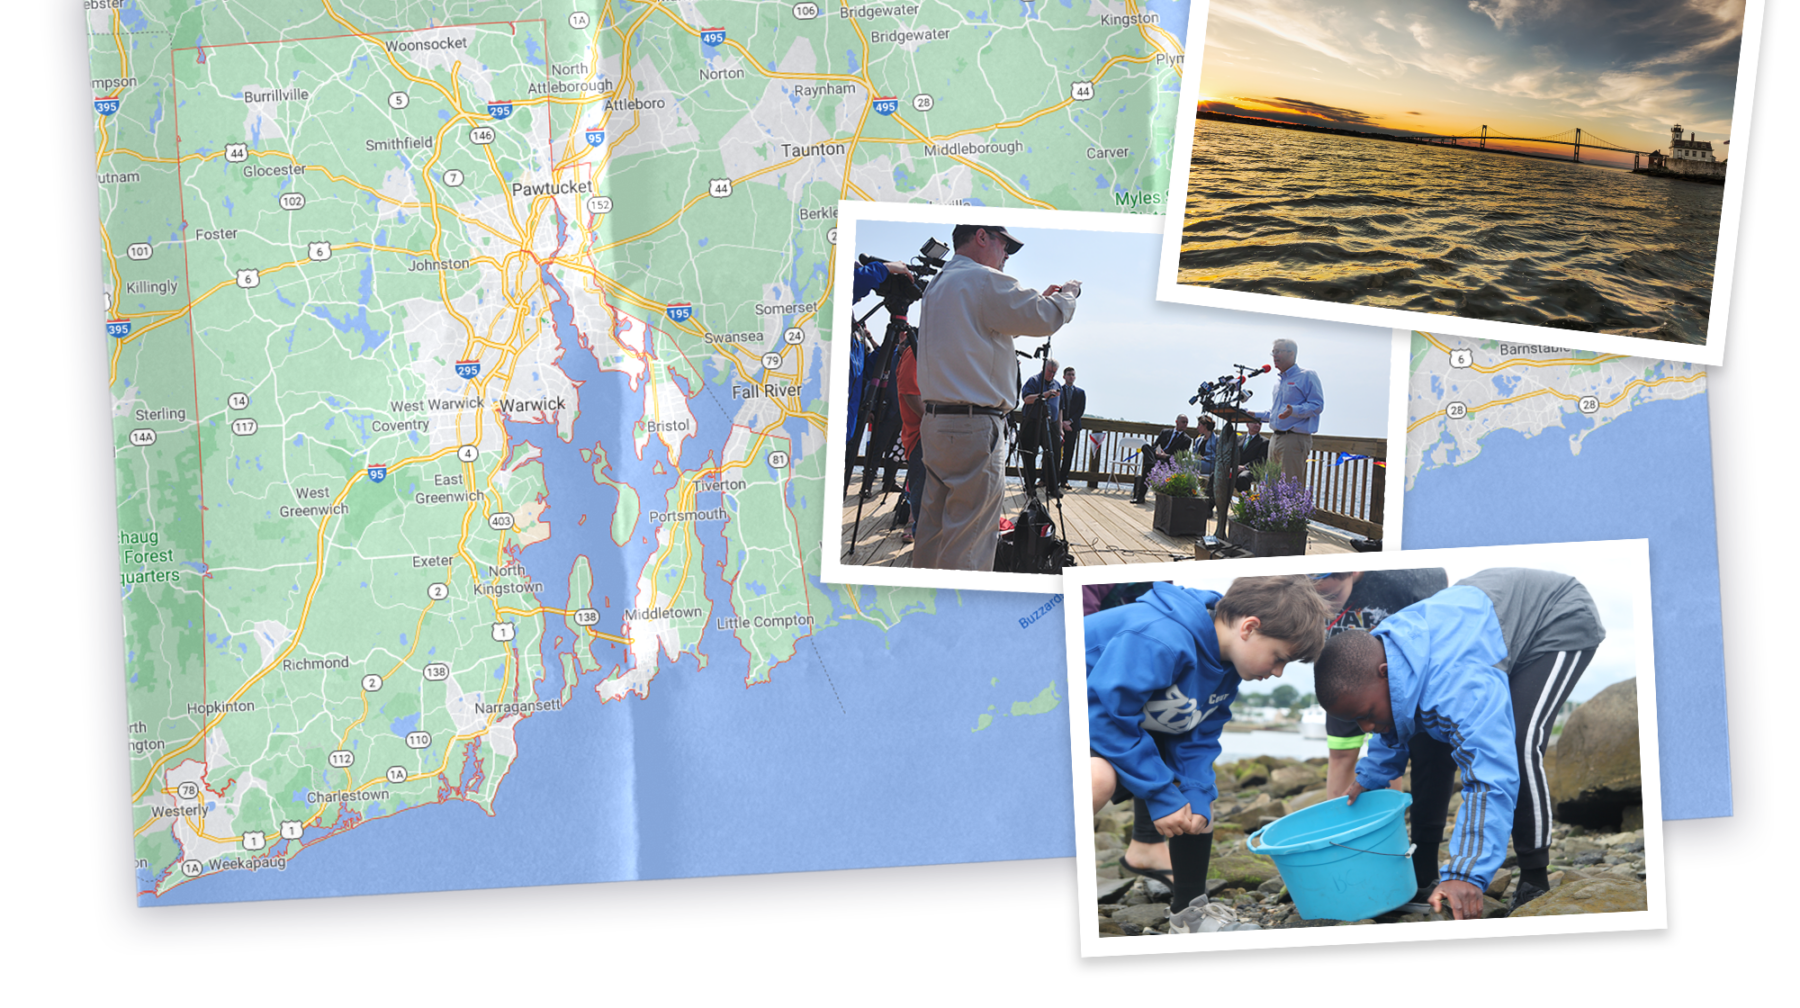 Collage of map and image of Rhode Island and photo of Jonathan Stone